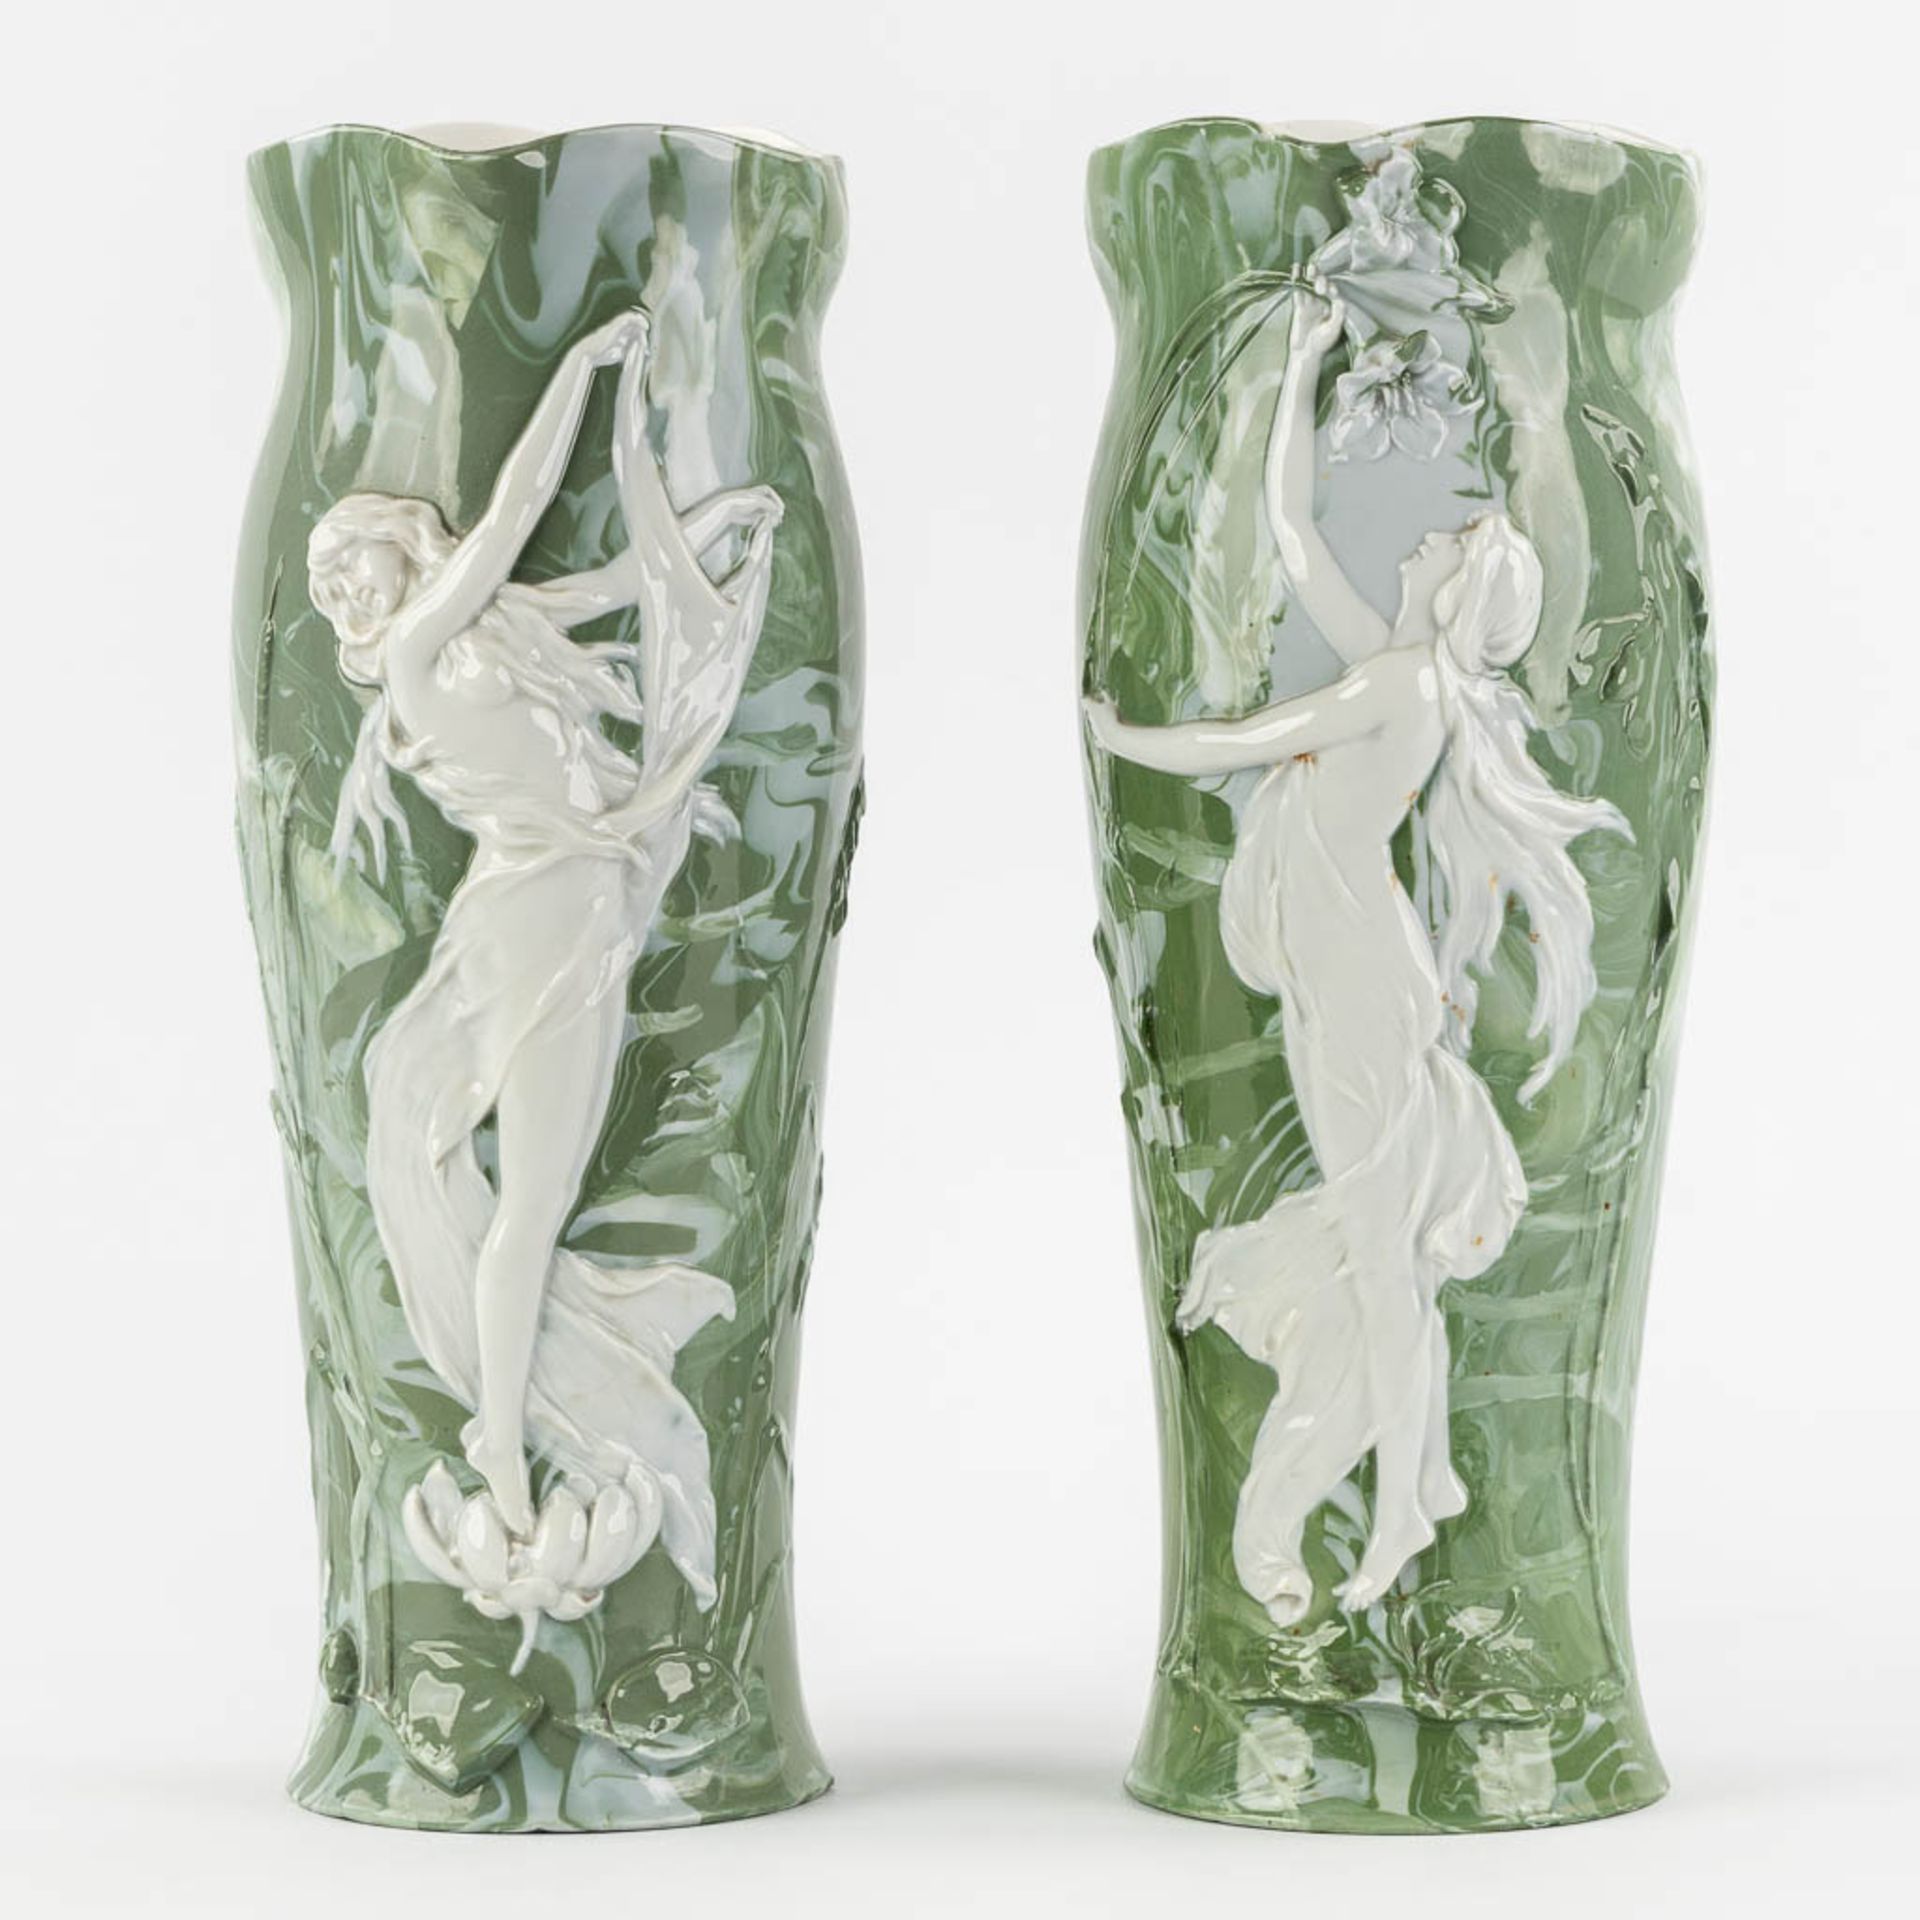 Attributed to Adolf OPPEL (1840-1923) 'Vases with Ladies' Art Nouveau. (L:13 x W:15 x H:36 cm)